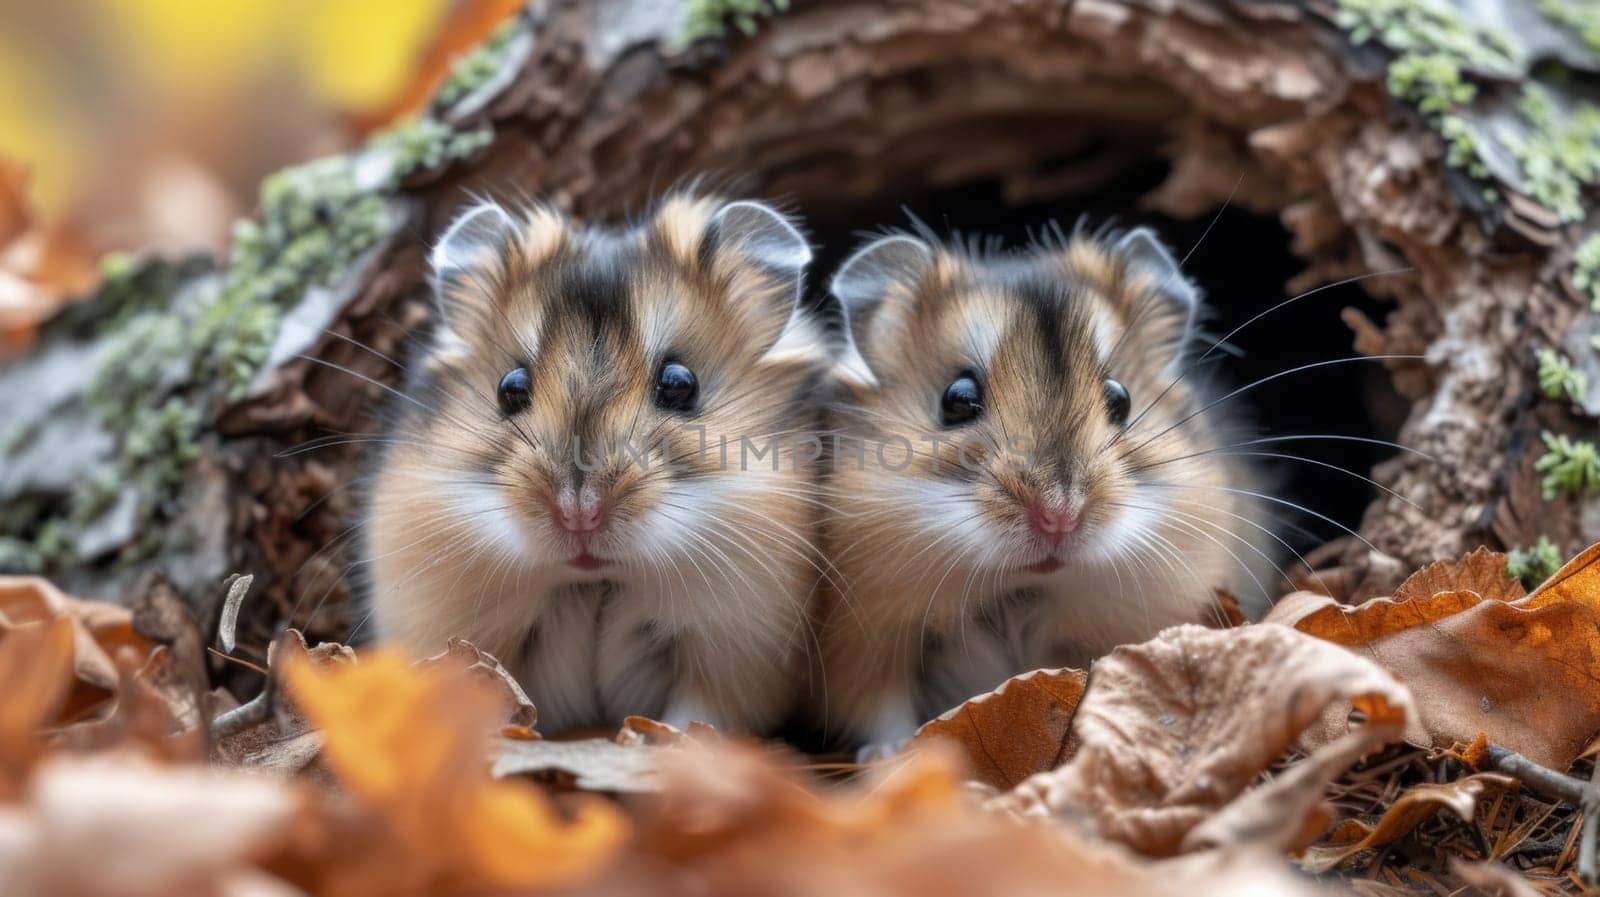 Two small hamsters are sitting in a hollowed out tree